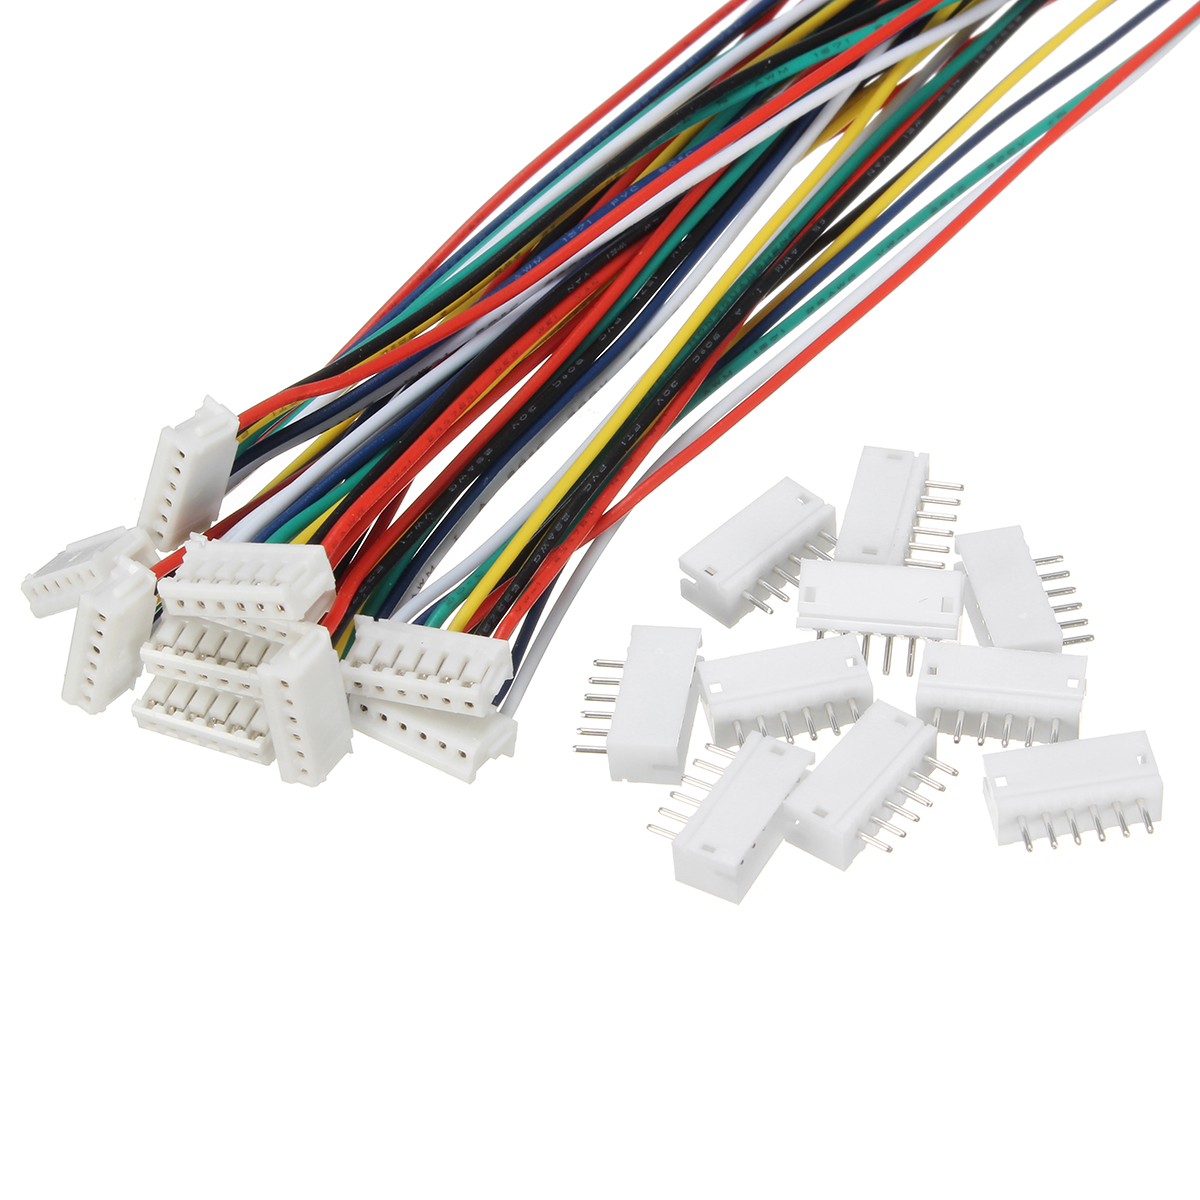 ILS 10 Sets Mini Micro JST 1.5mm ZH 4-Pin Connector Plug avec Wires Cables 150mm 